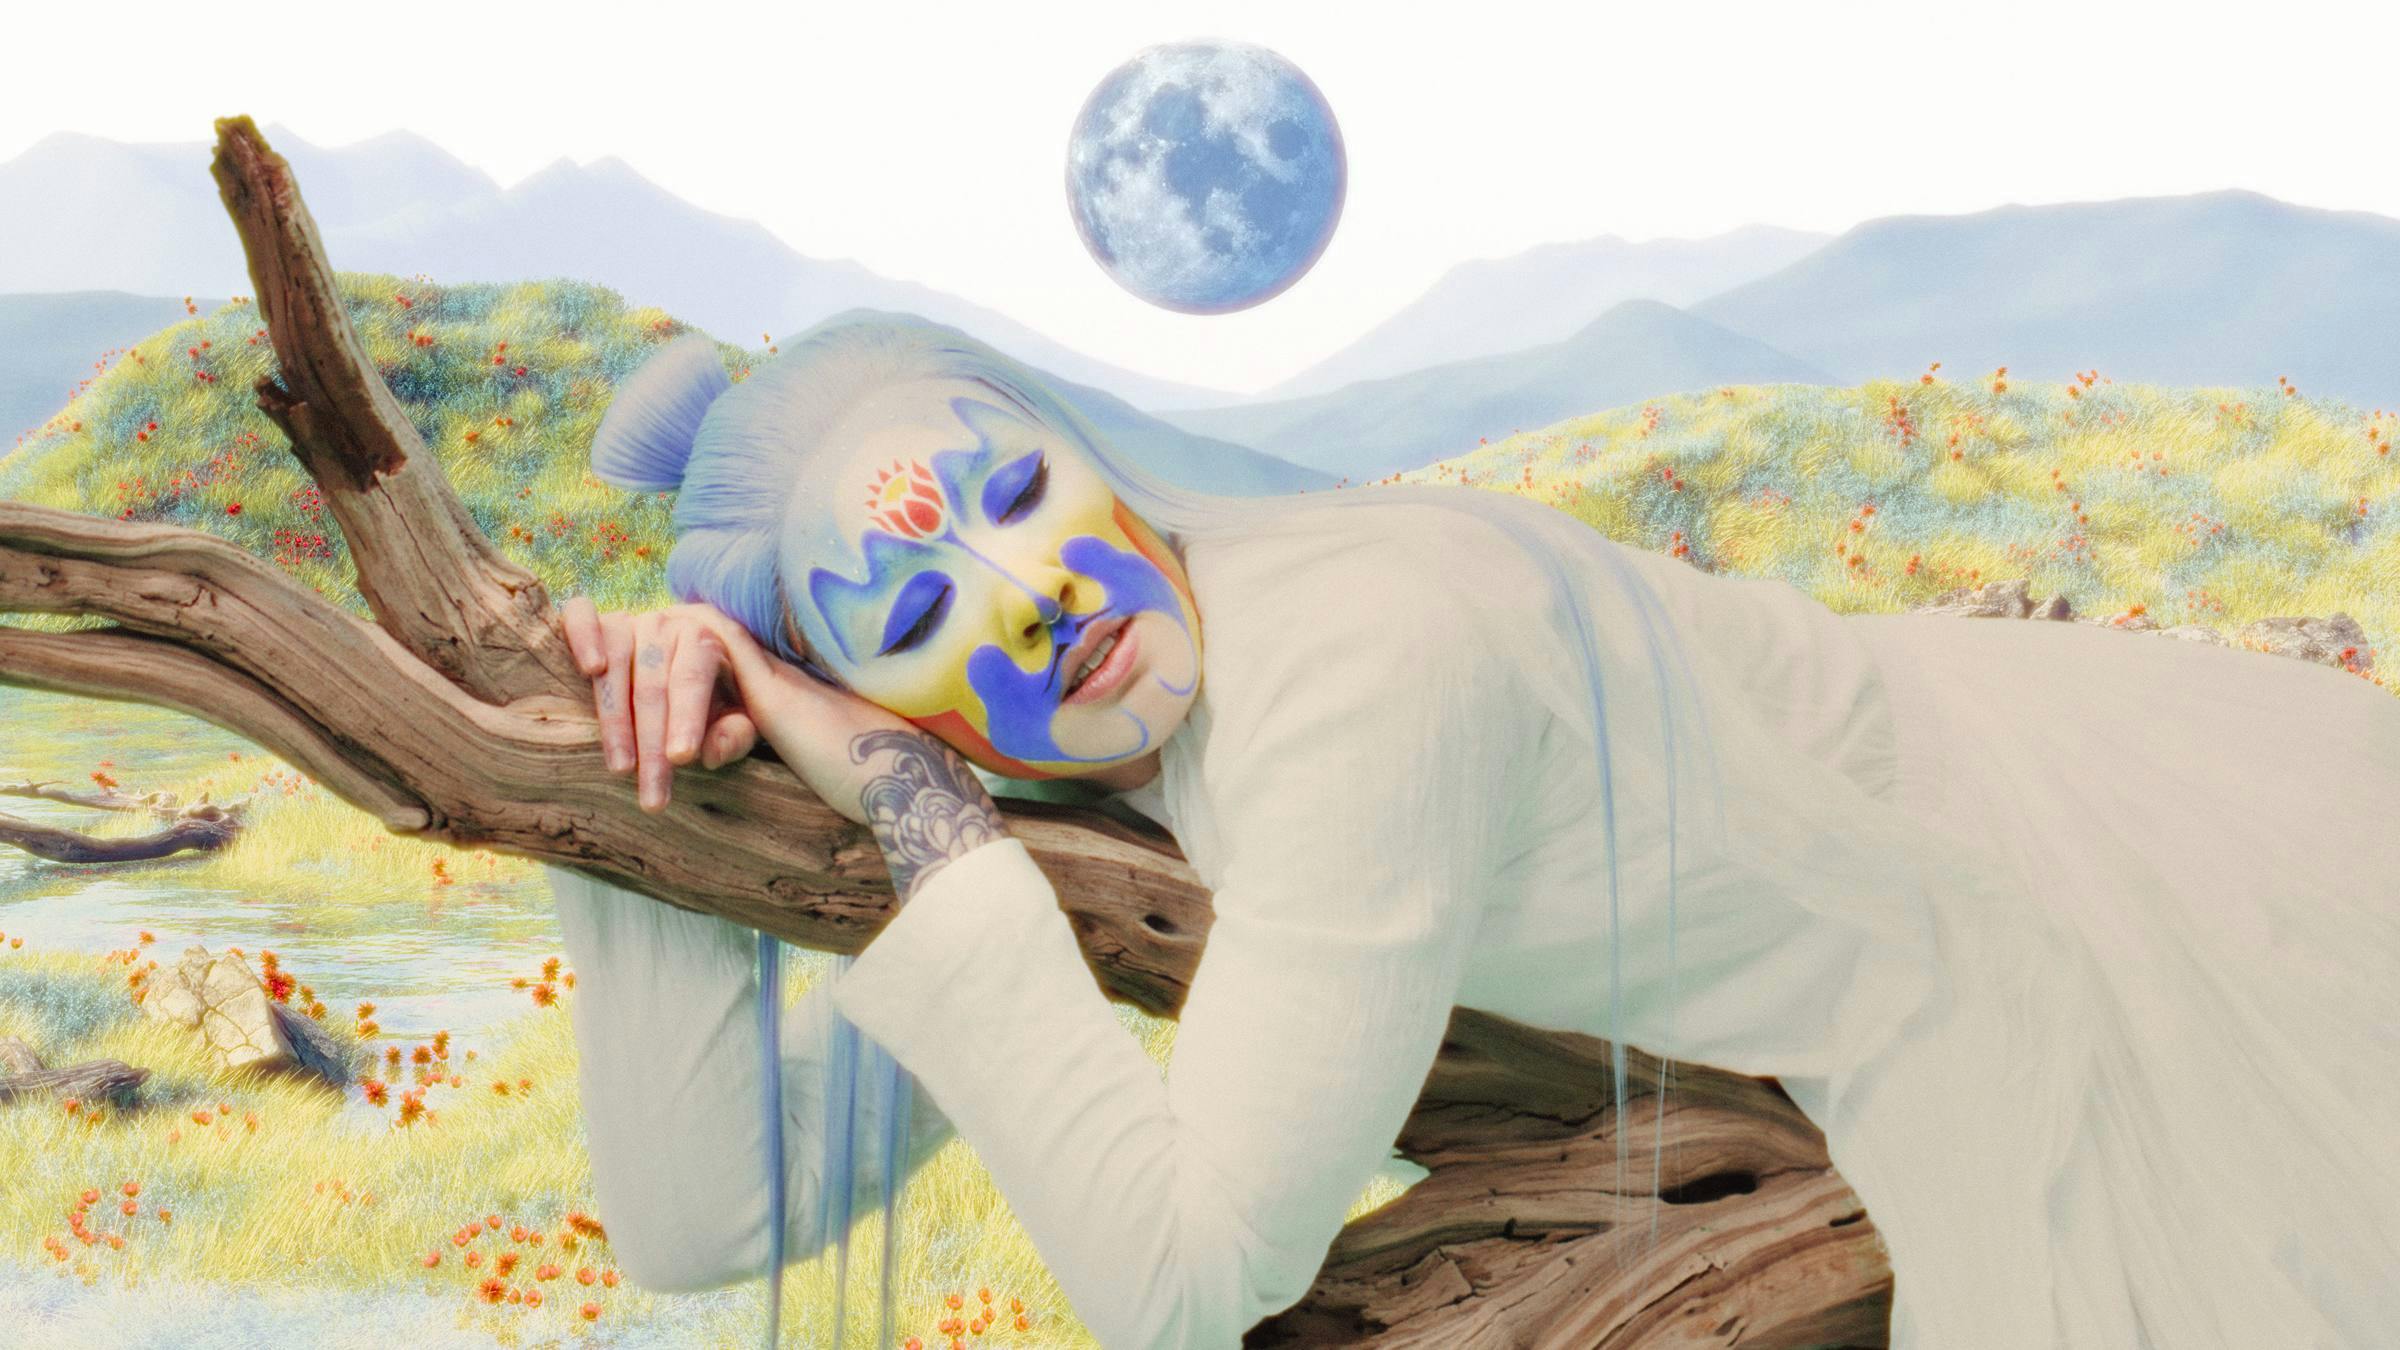 Person wearing white clothing with pale blue long hair and their face painted in blue, orange and yellow, lying on a tree branch